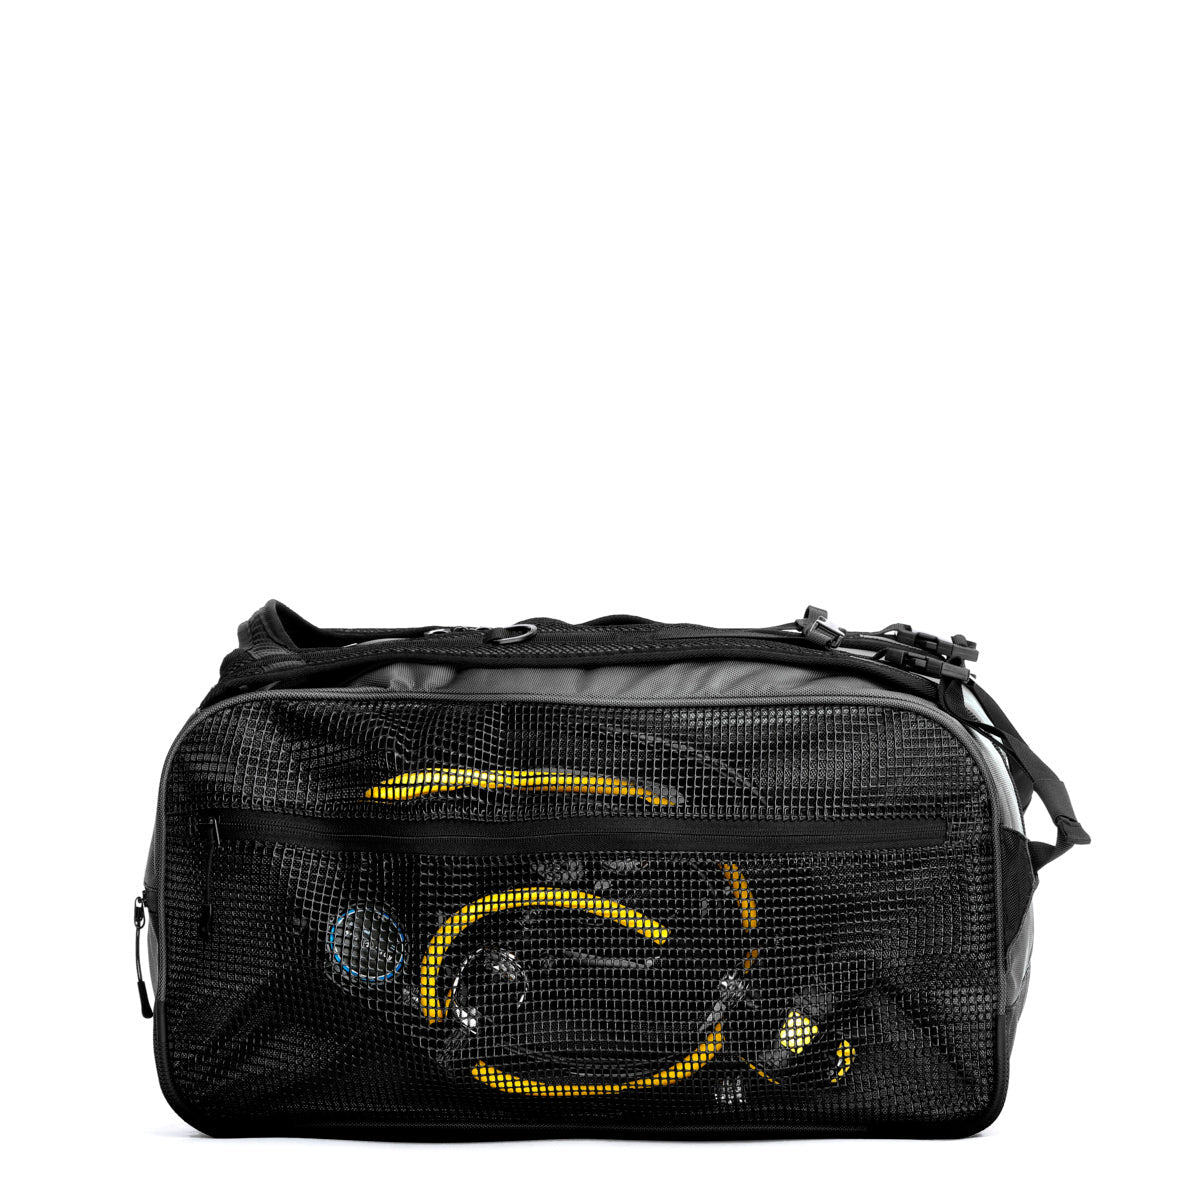 Aqualung Aqualung Explorer II Duffle Pack by Oyster Diving Shop